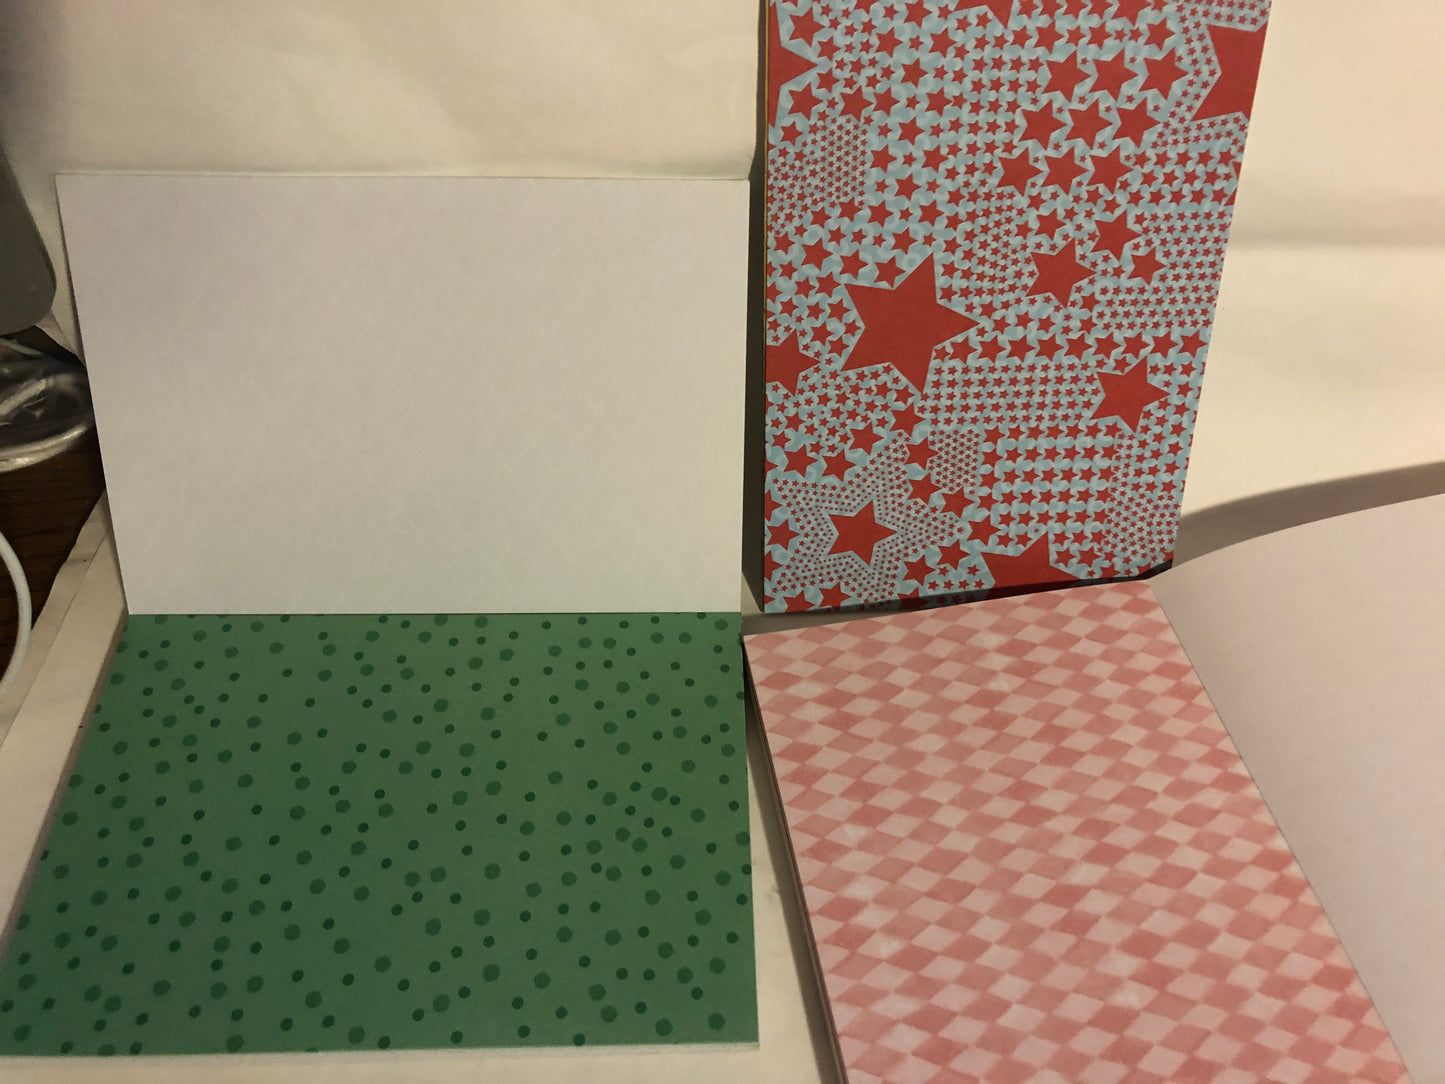 Open Box 6.5" x 4.5" Scrapbook Card Stock with Assorted Colors and Patterns